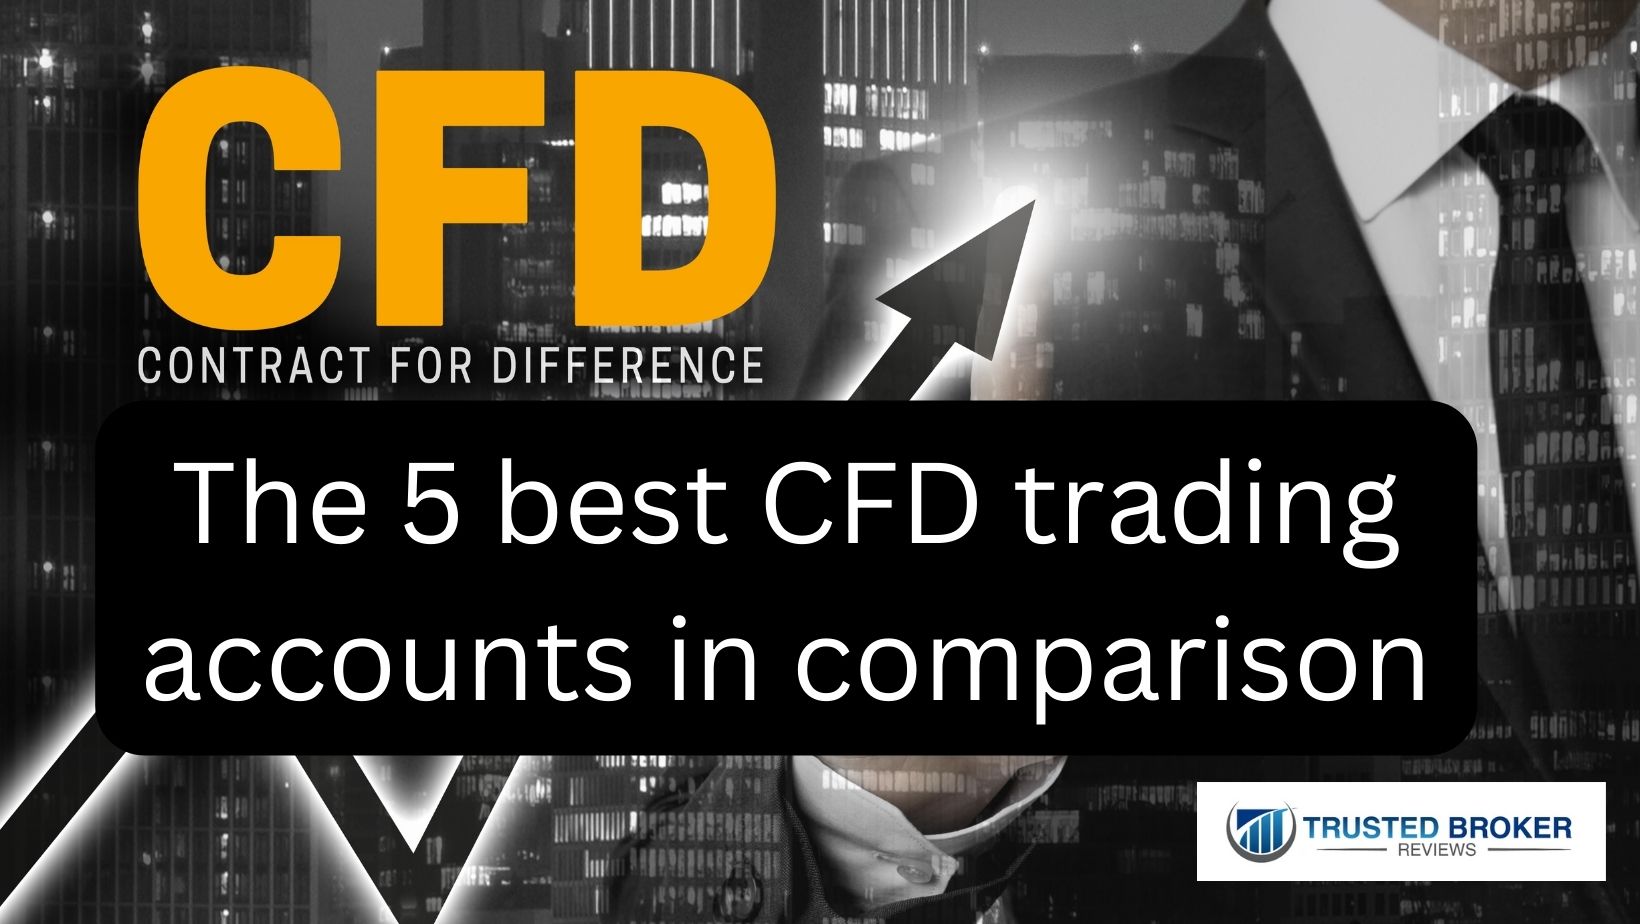 The 5 best CFD trading accounts in comparison